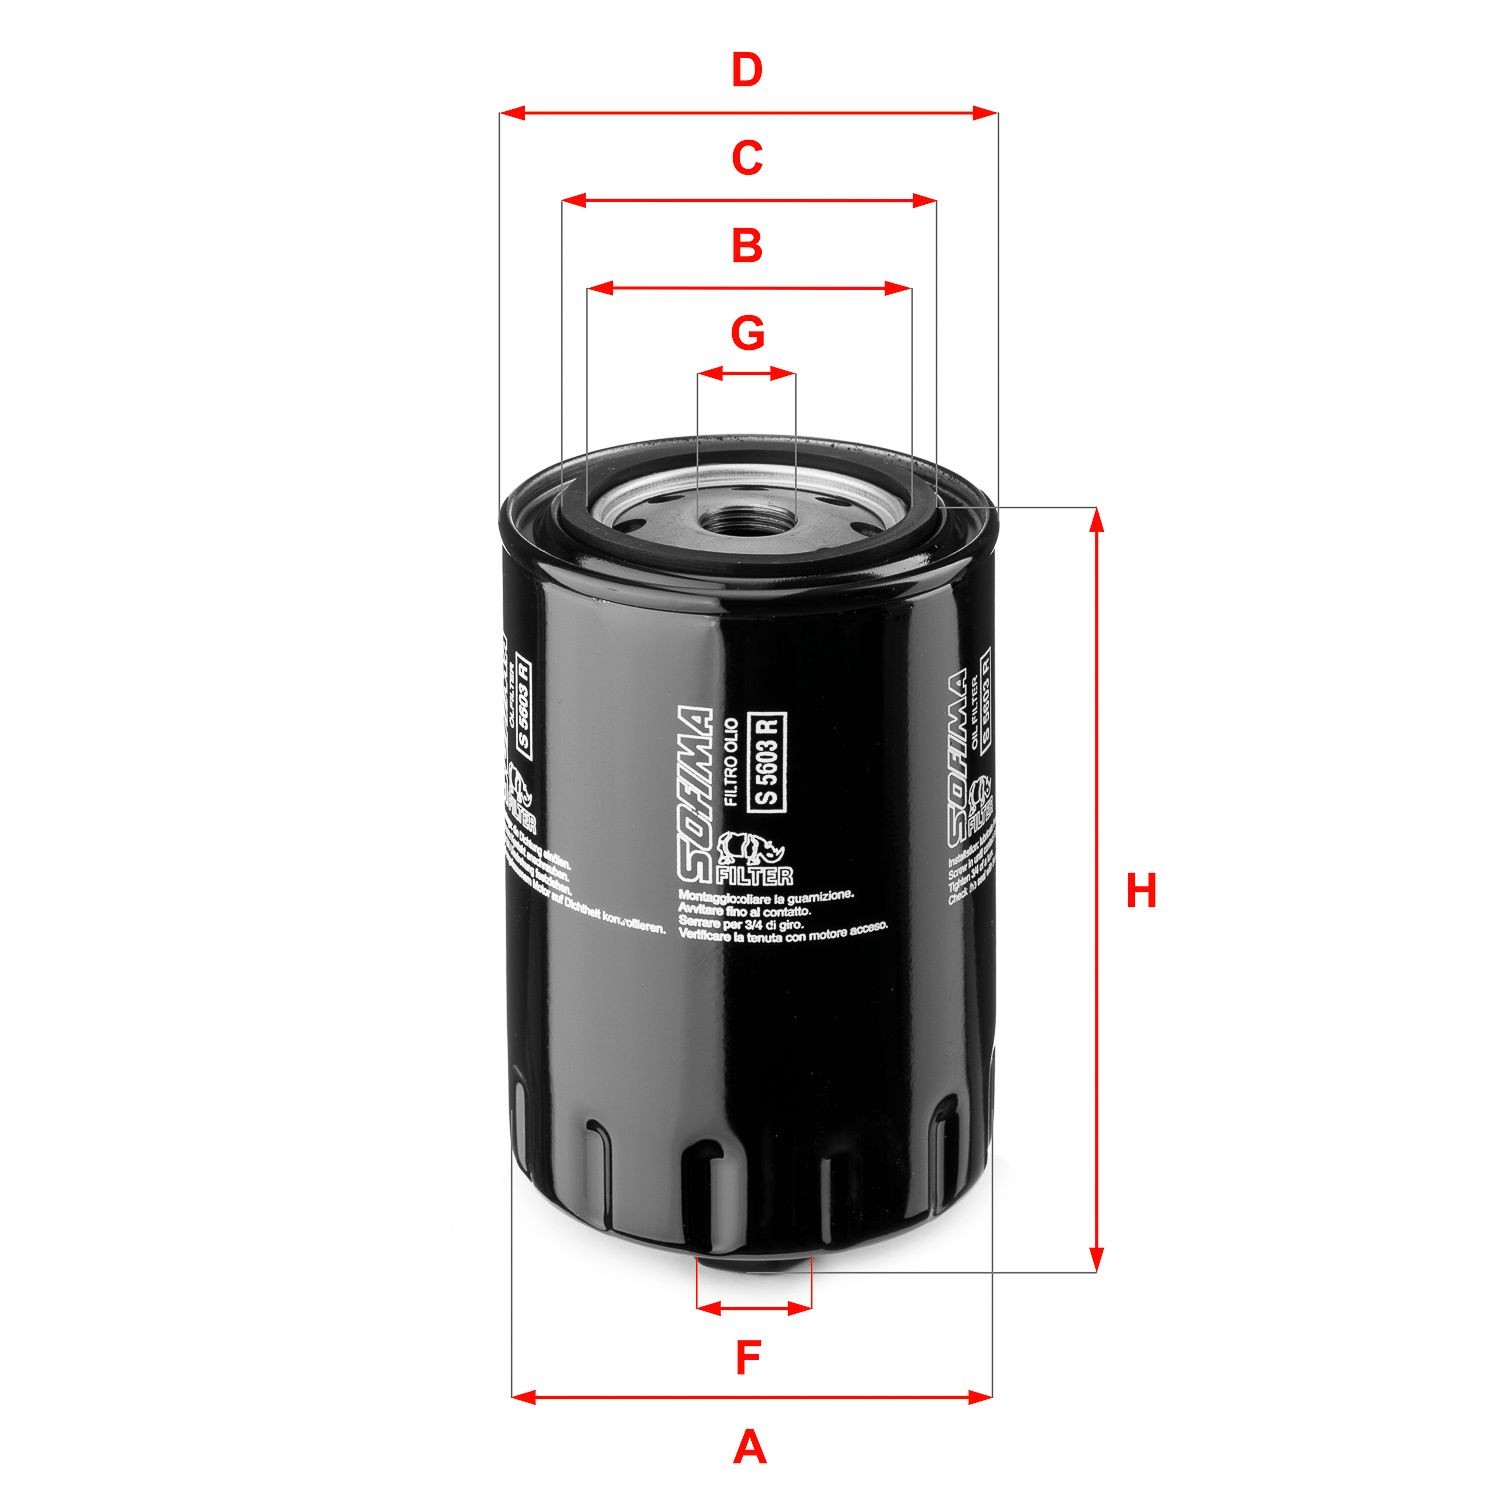 SOFIMA S 5603 R Oil filter 3/4-16 UNF, with one anti-return valve, Spin-on Filter